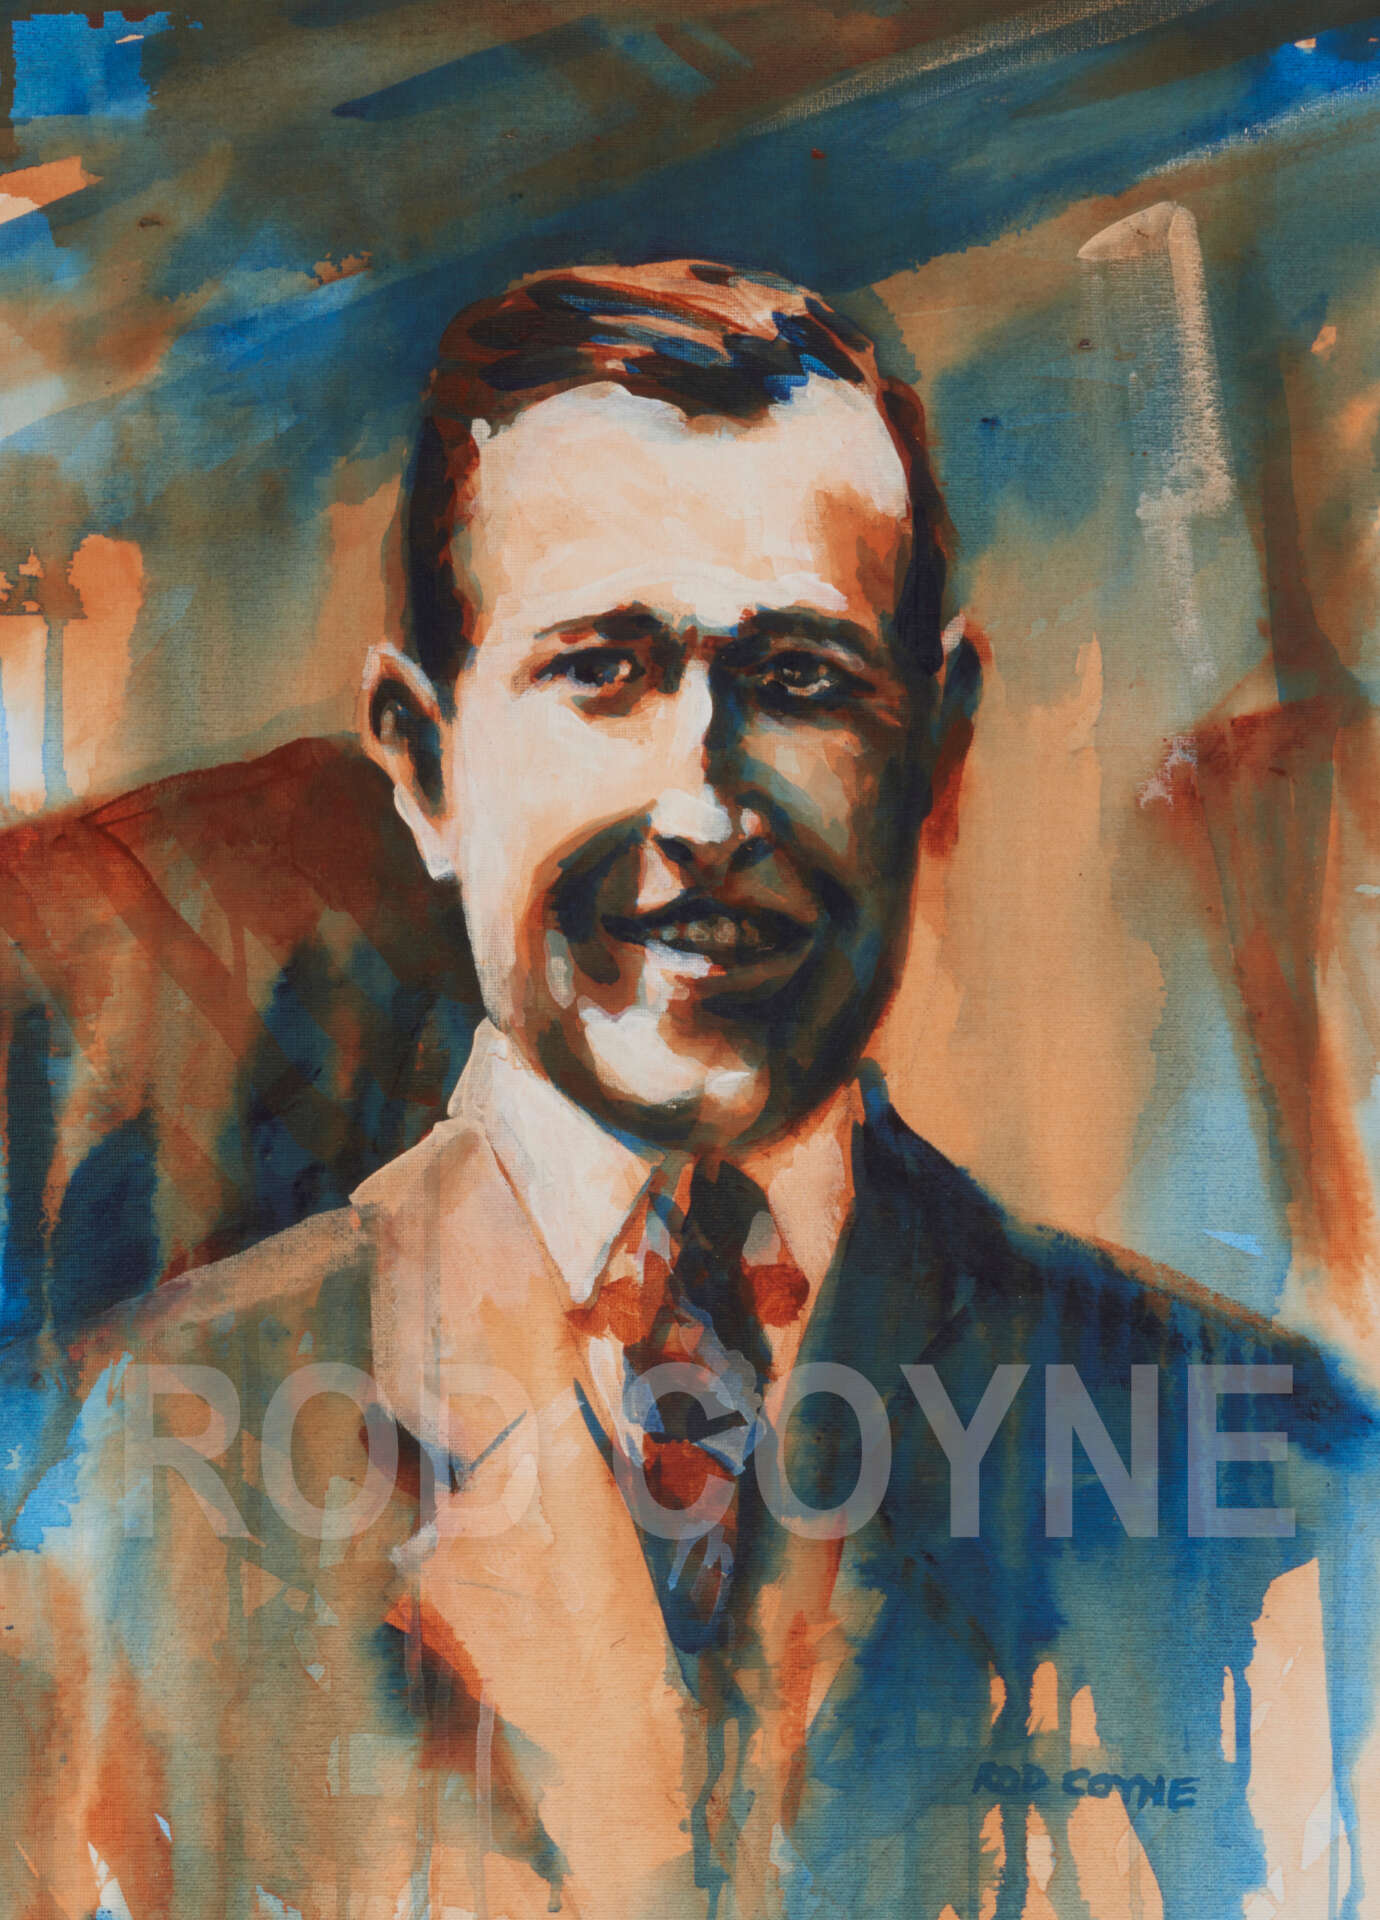 artist rod coyne's portrait "Harry Boland 1916" is shown here, watermarked.